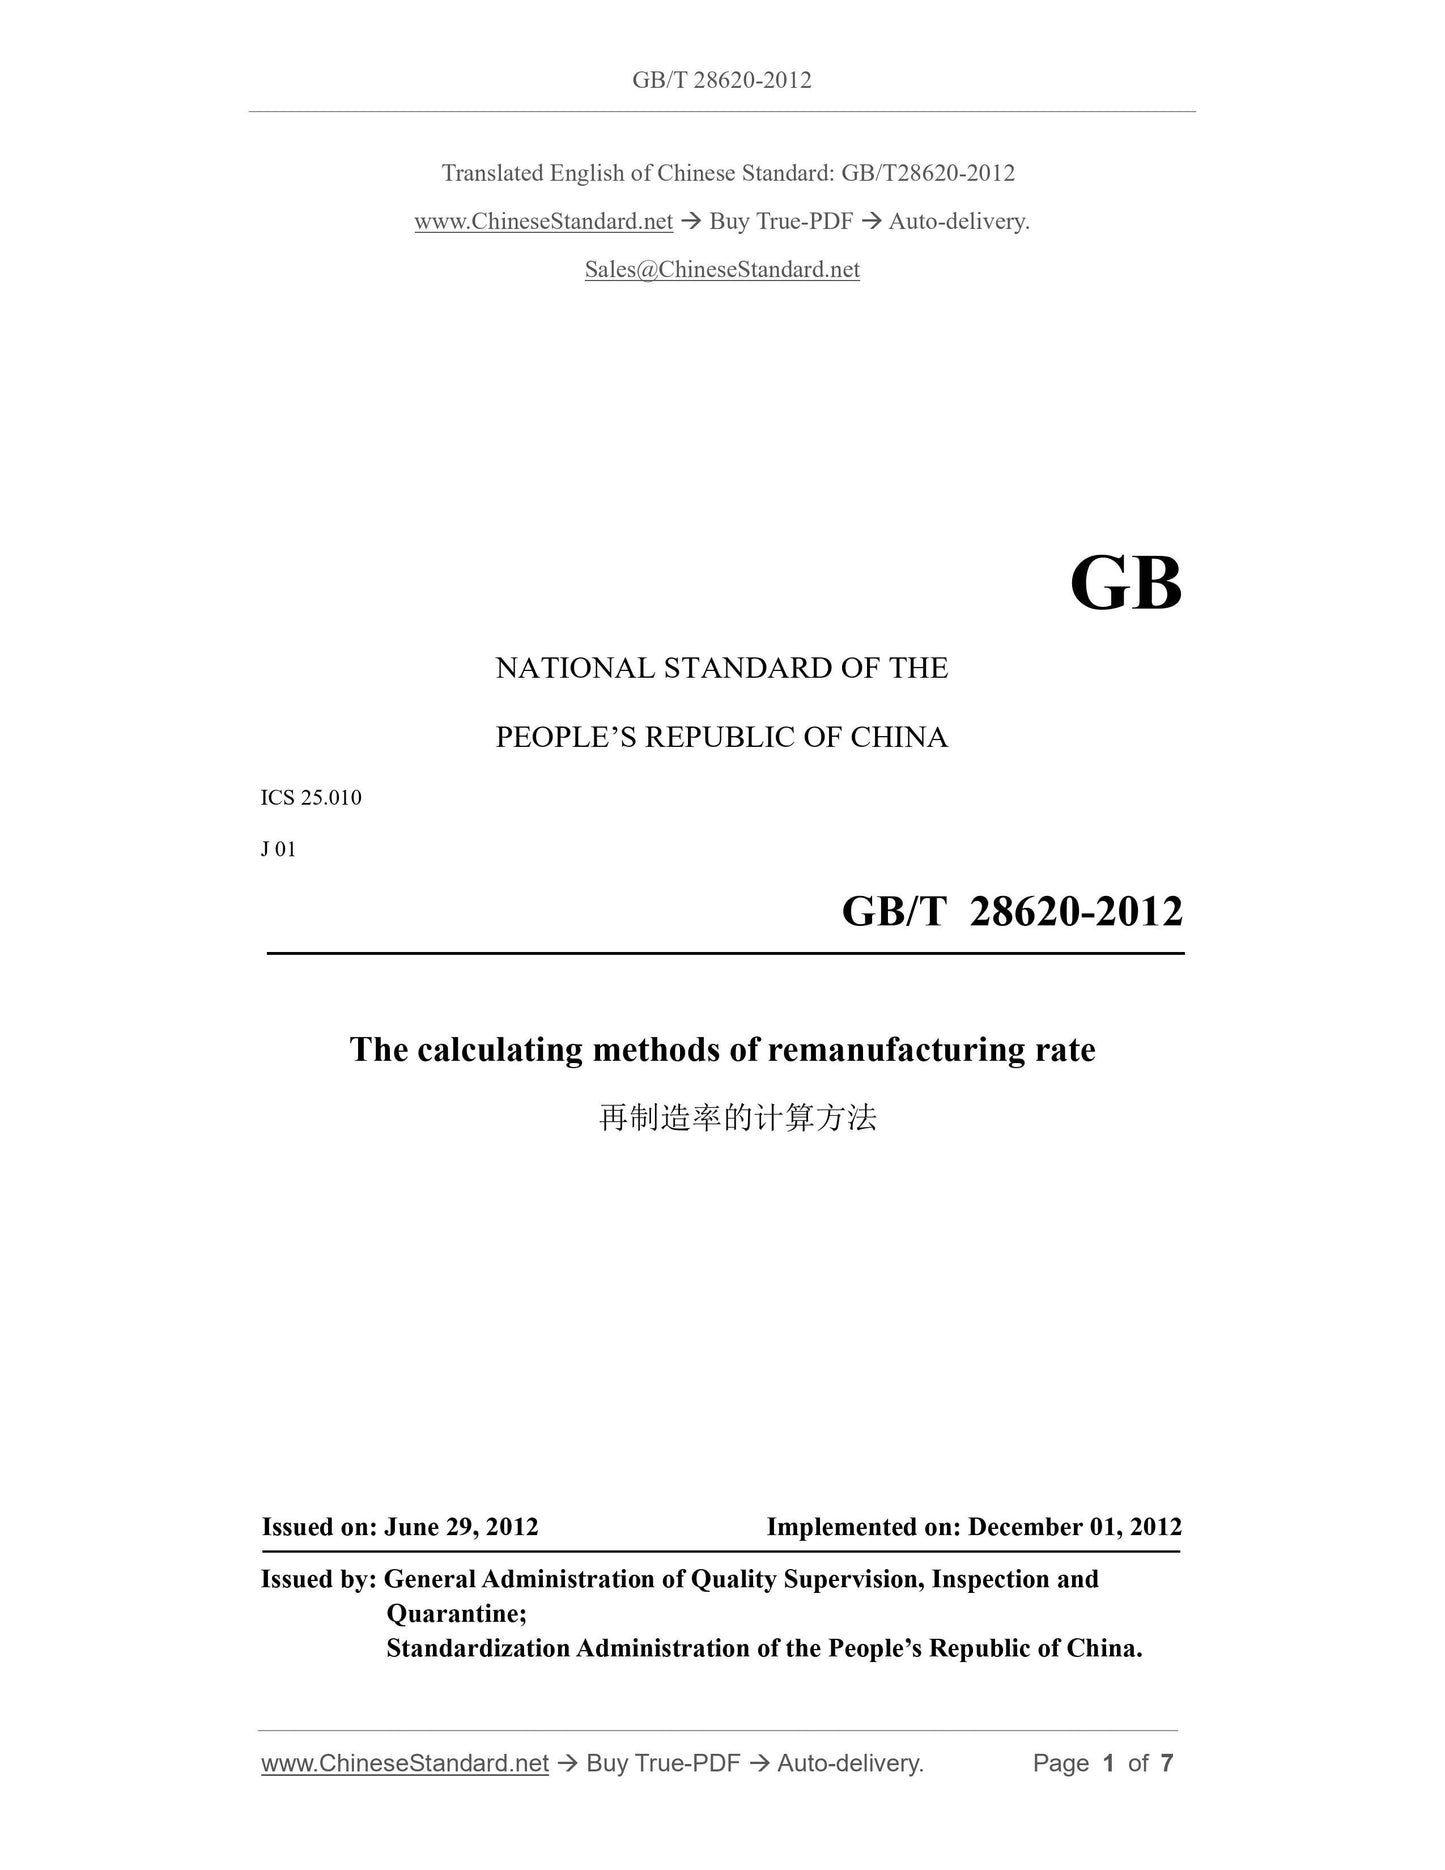 GB/T 28620-2012 Page 1